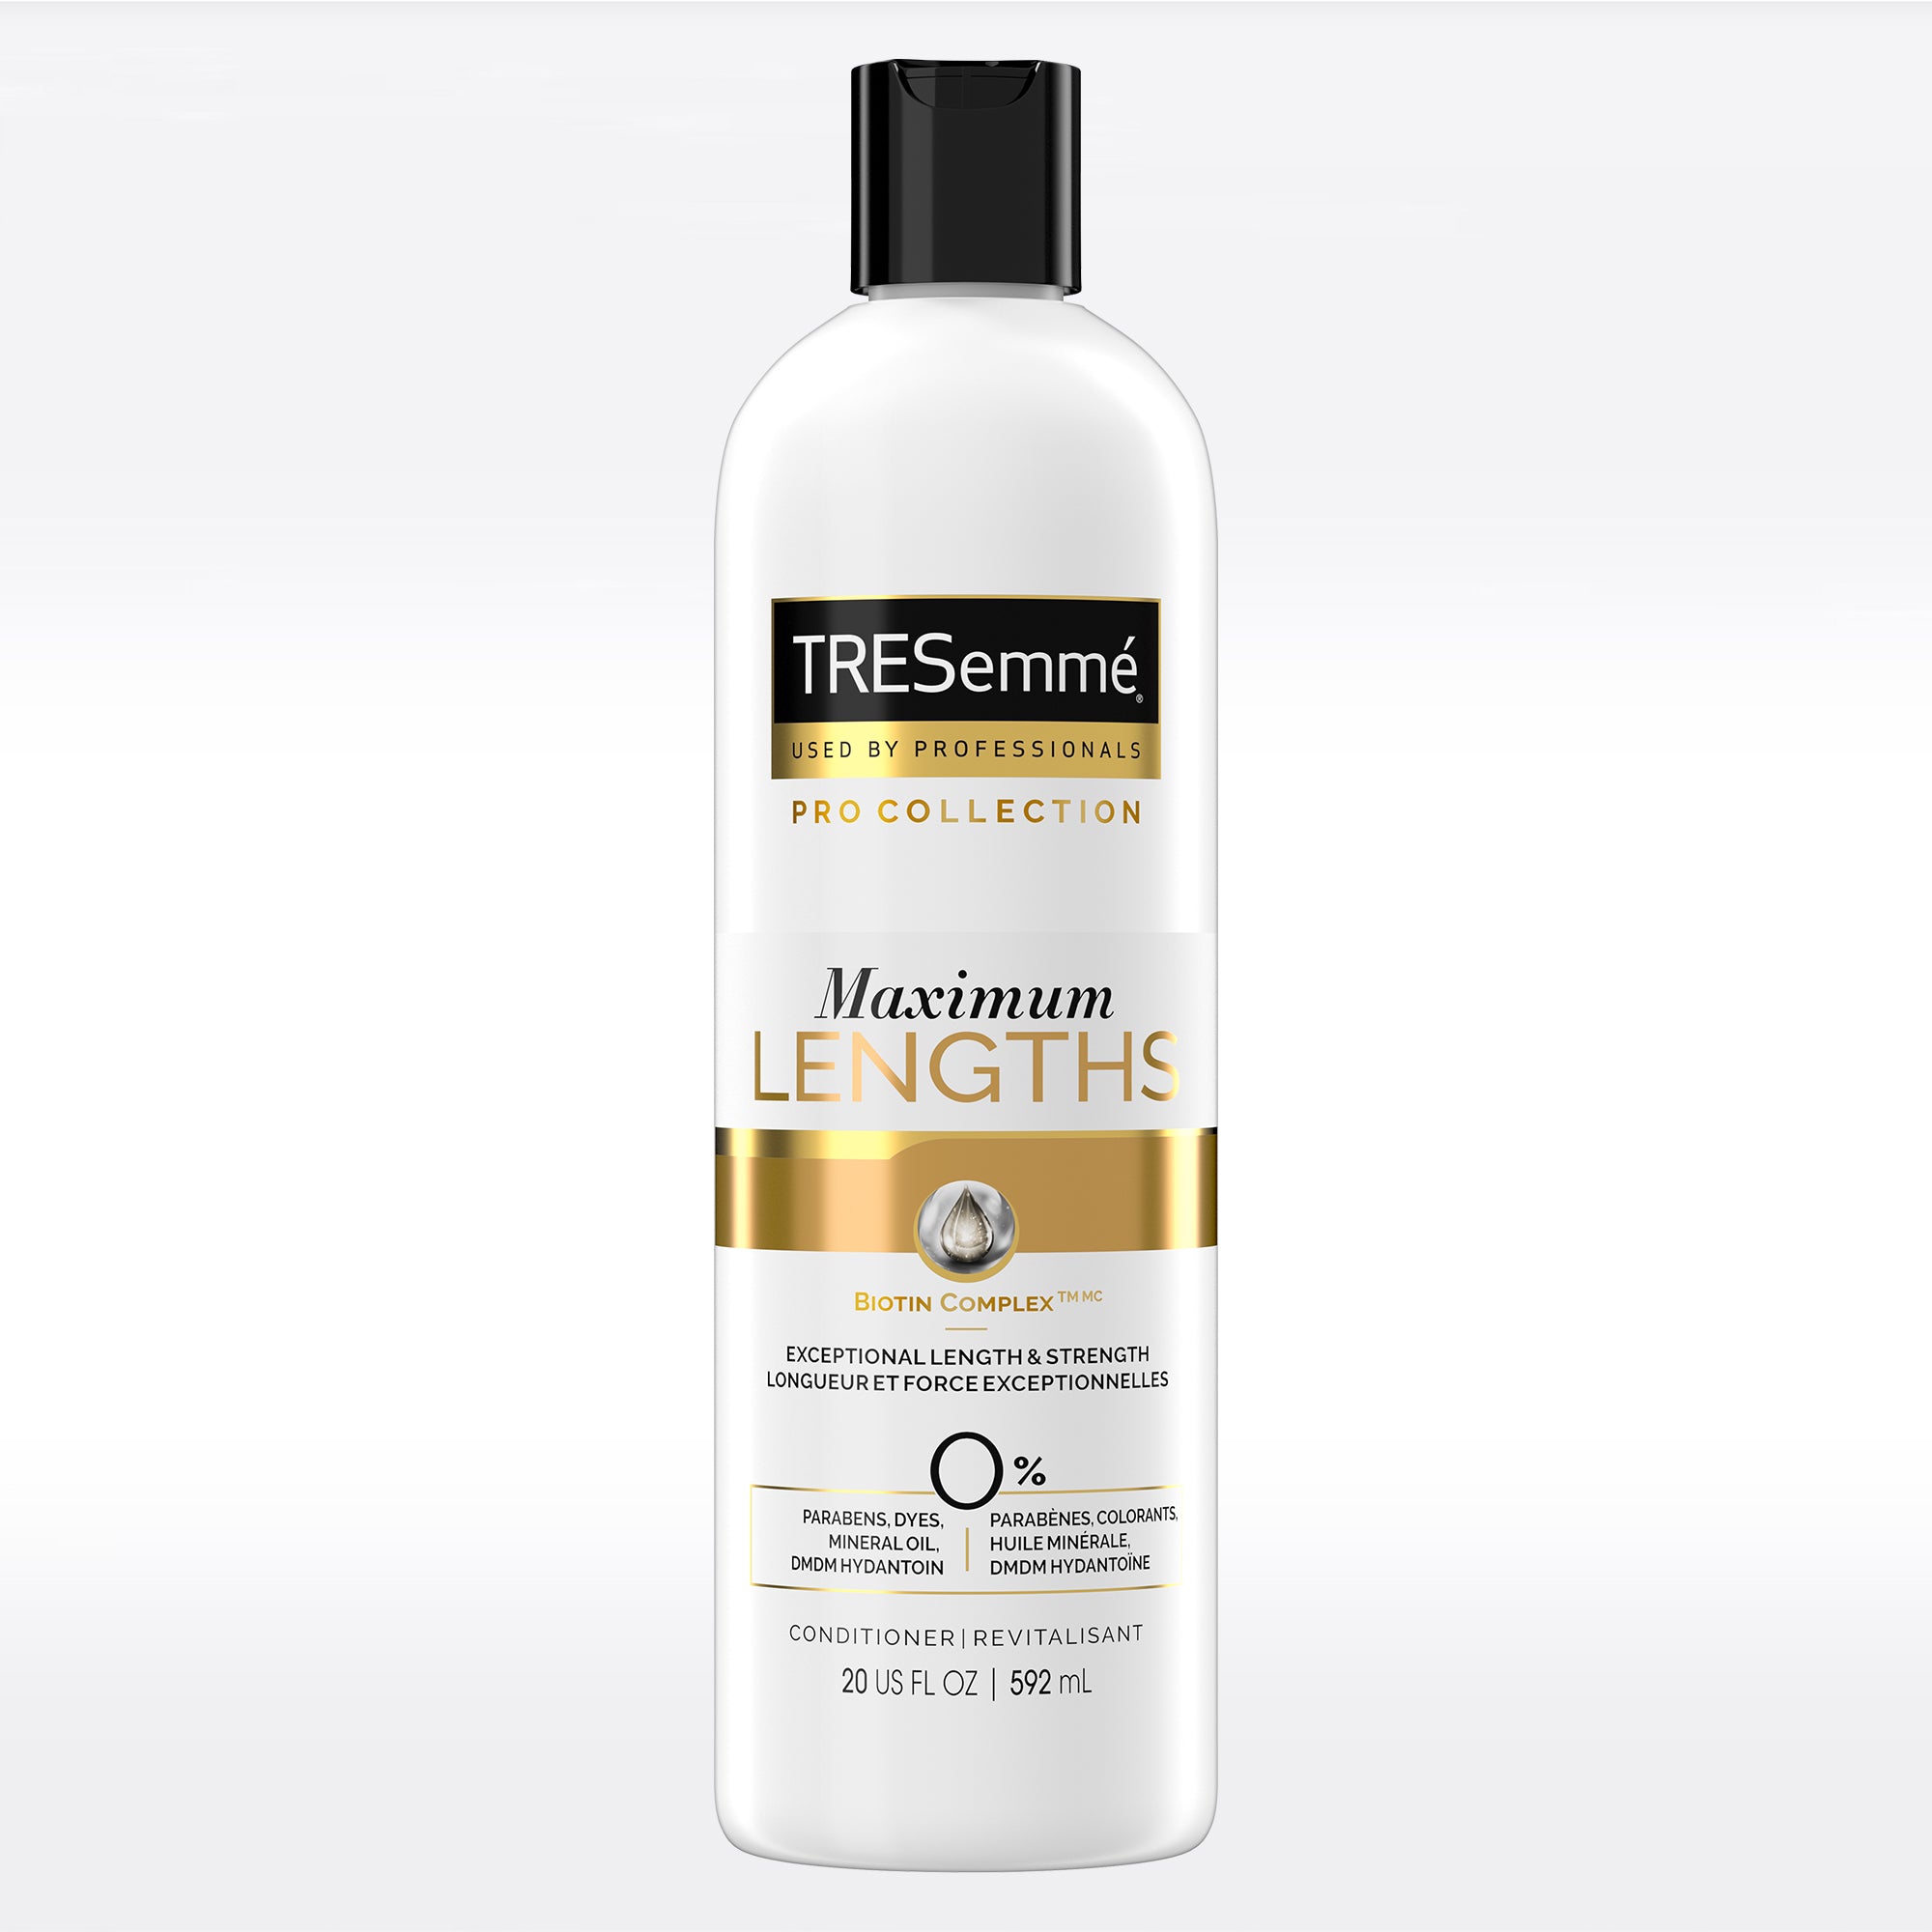 Tresemme Pro Collection Maximum Lengths Conditioner 592mL